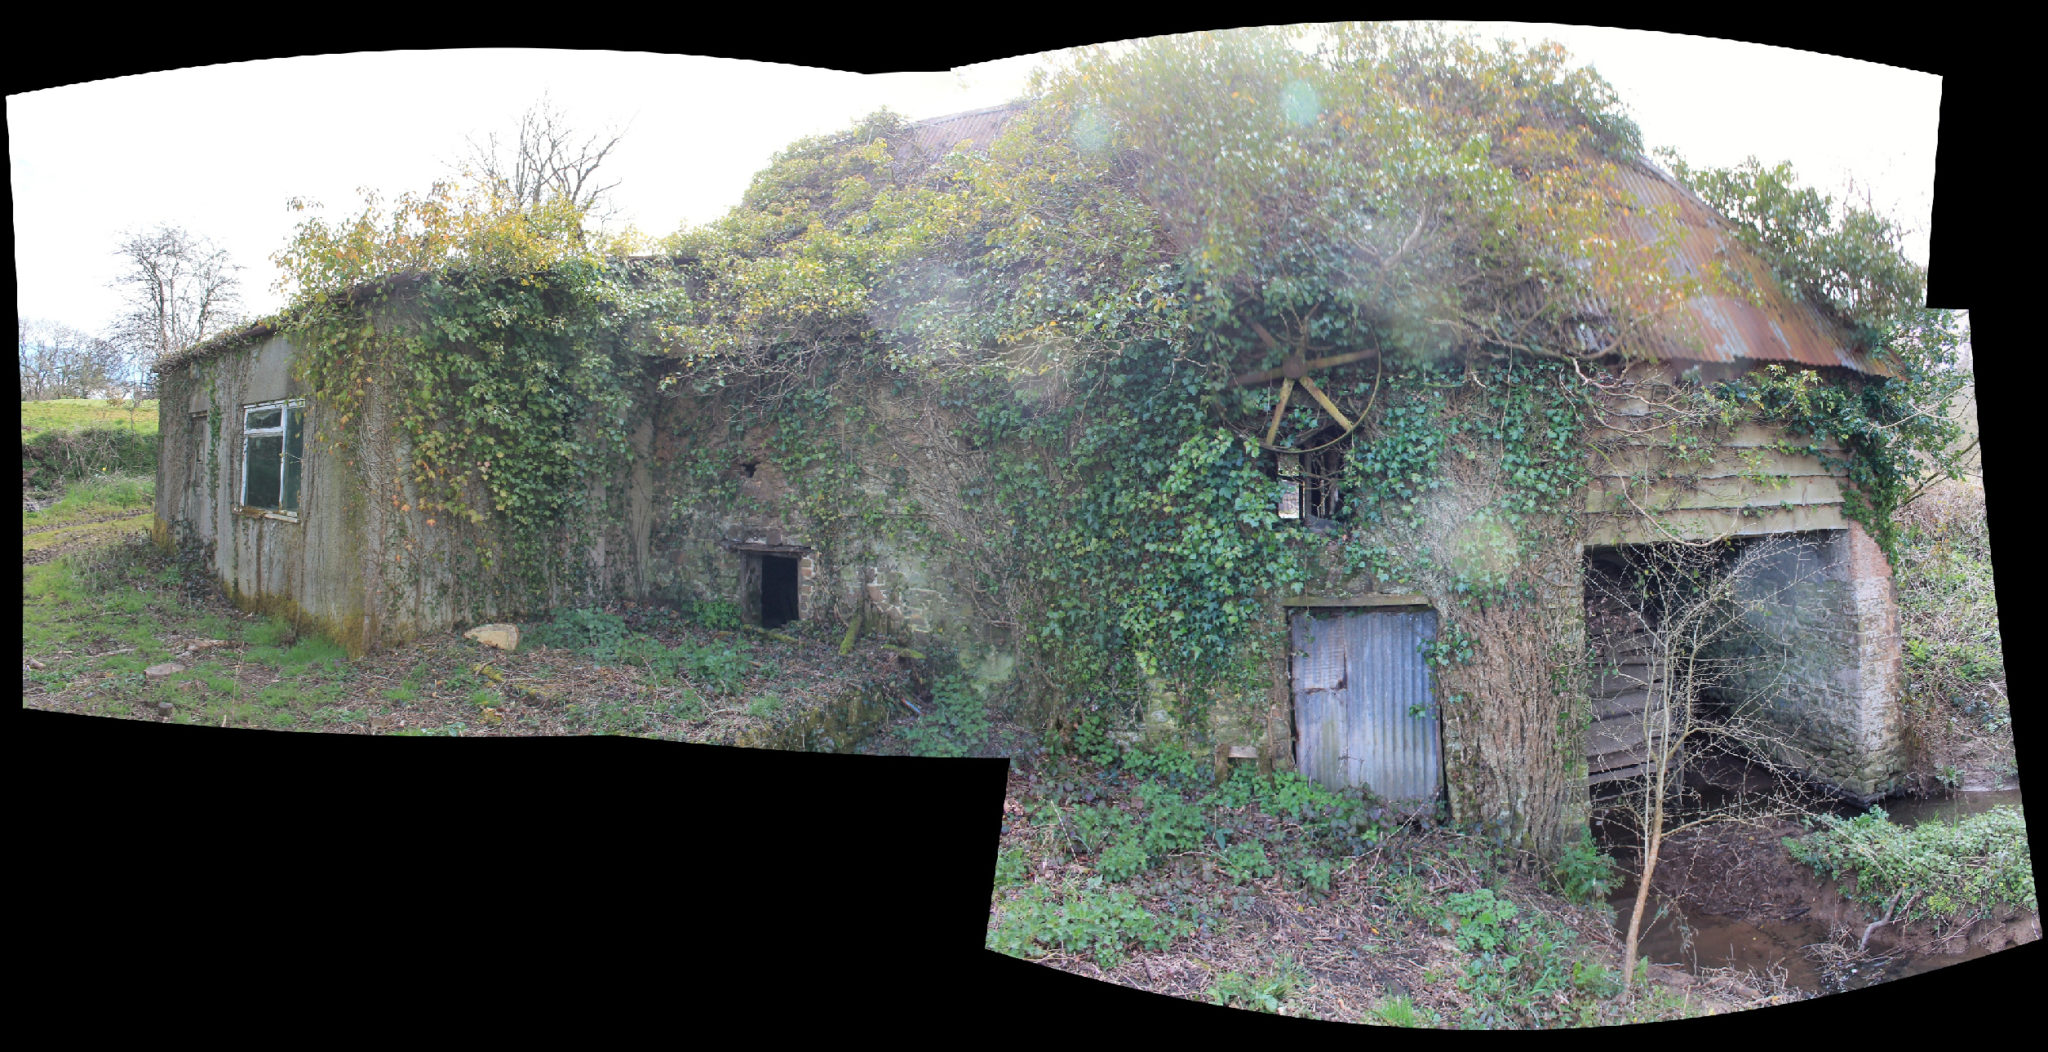 Survey of an old watermill